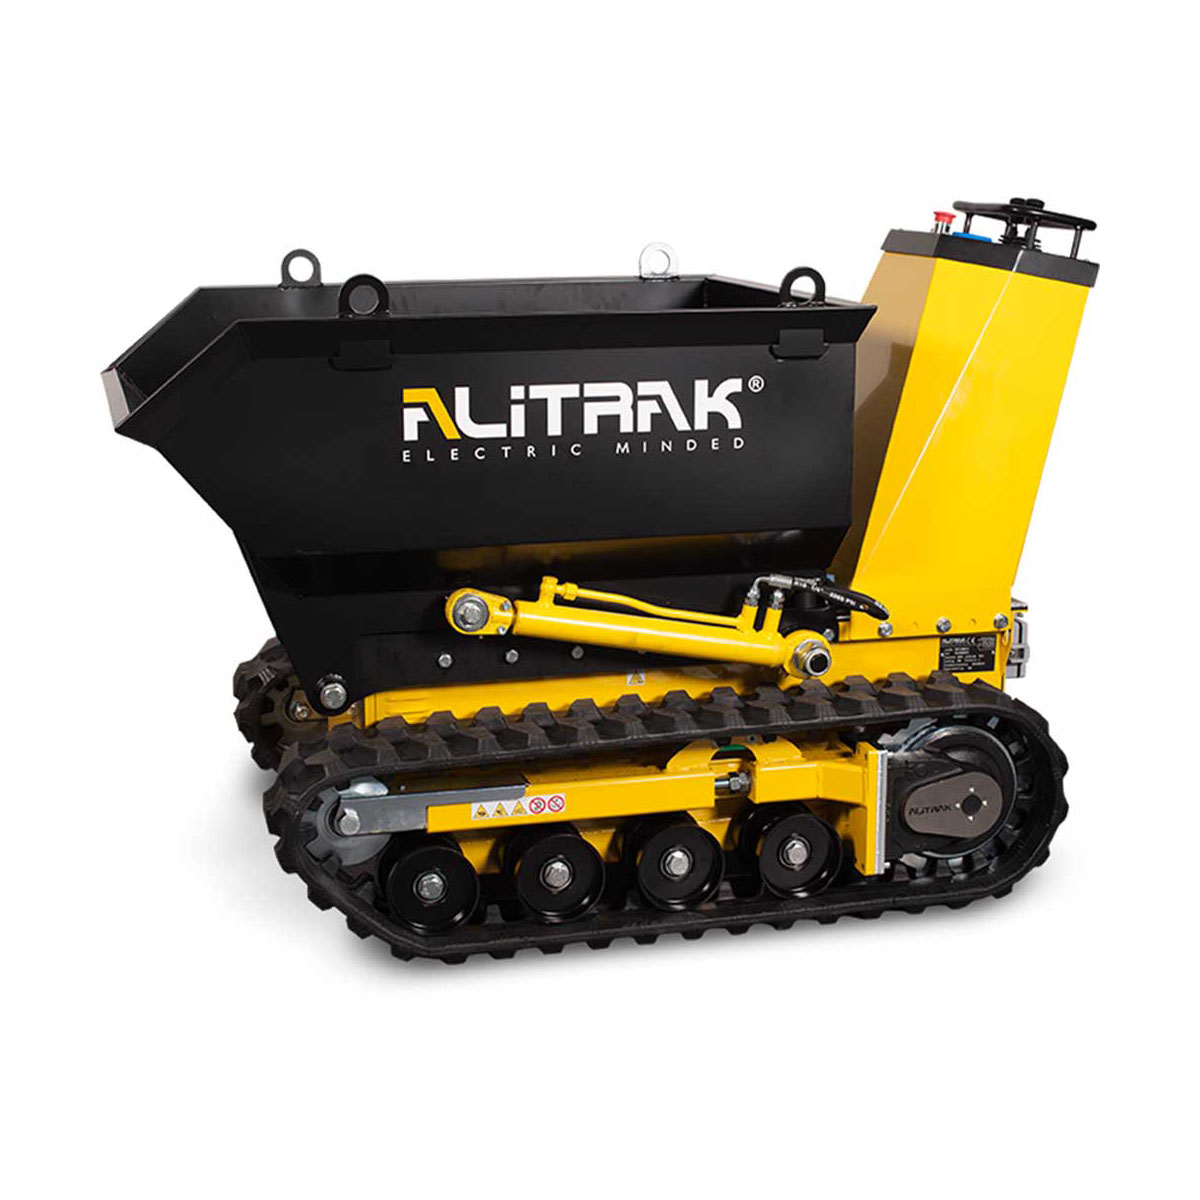 Buy Electric Dumper - Skip on Tracks available at Astrolift NZ